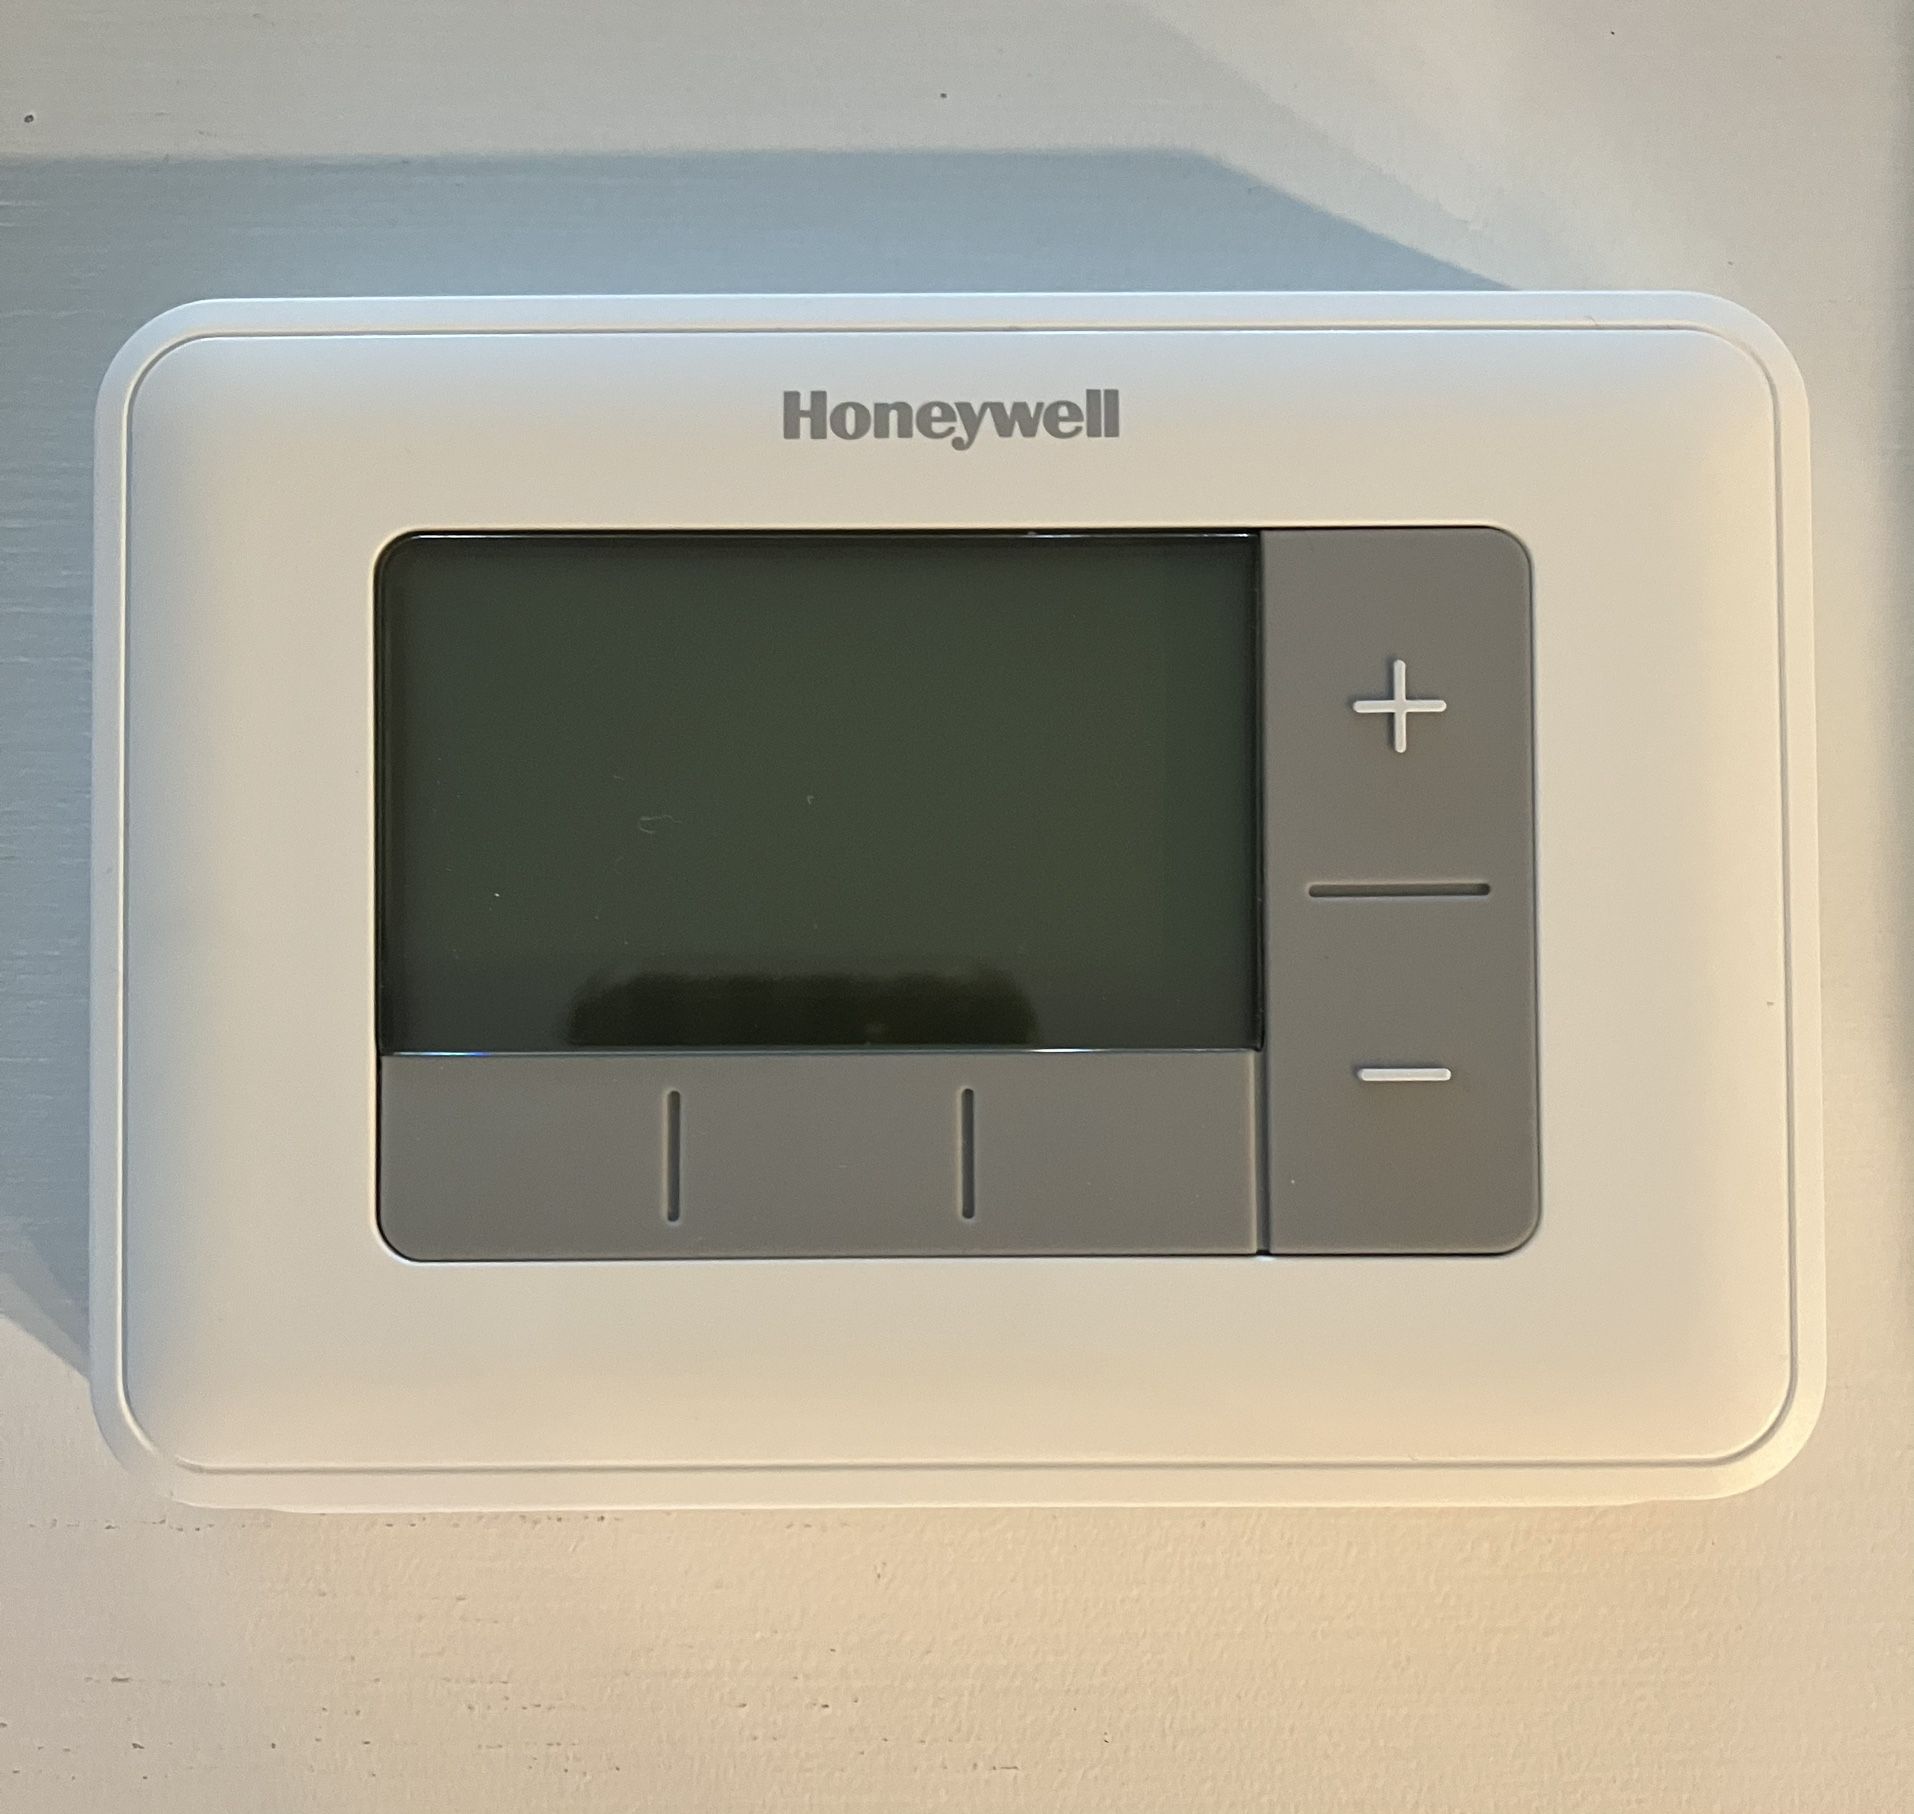 Honeywell RTH6360 Programmable Thermostat